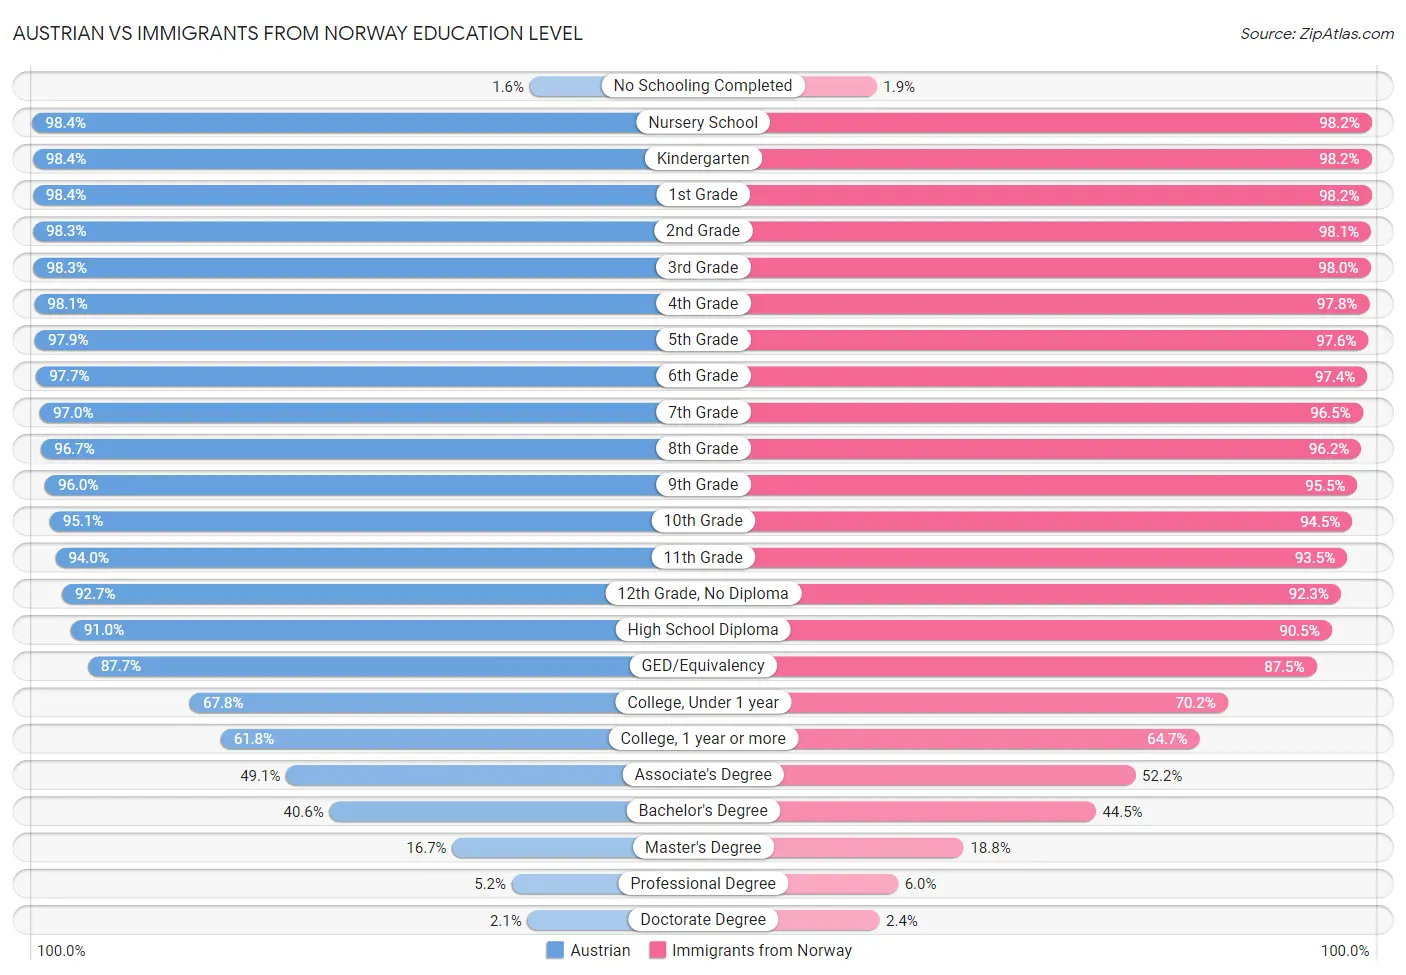 Austrian vs Immigrants from Norway Education Level